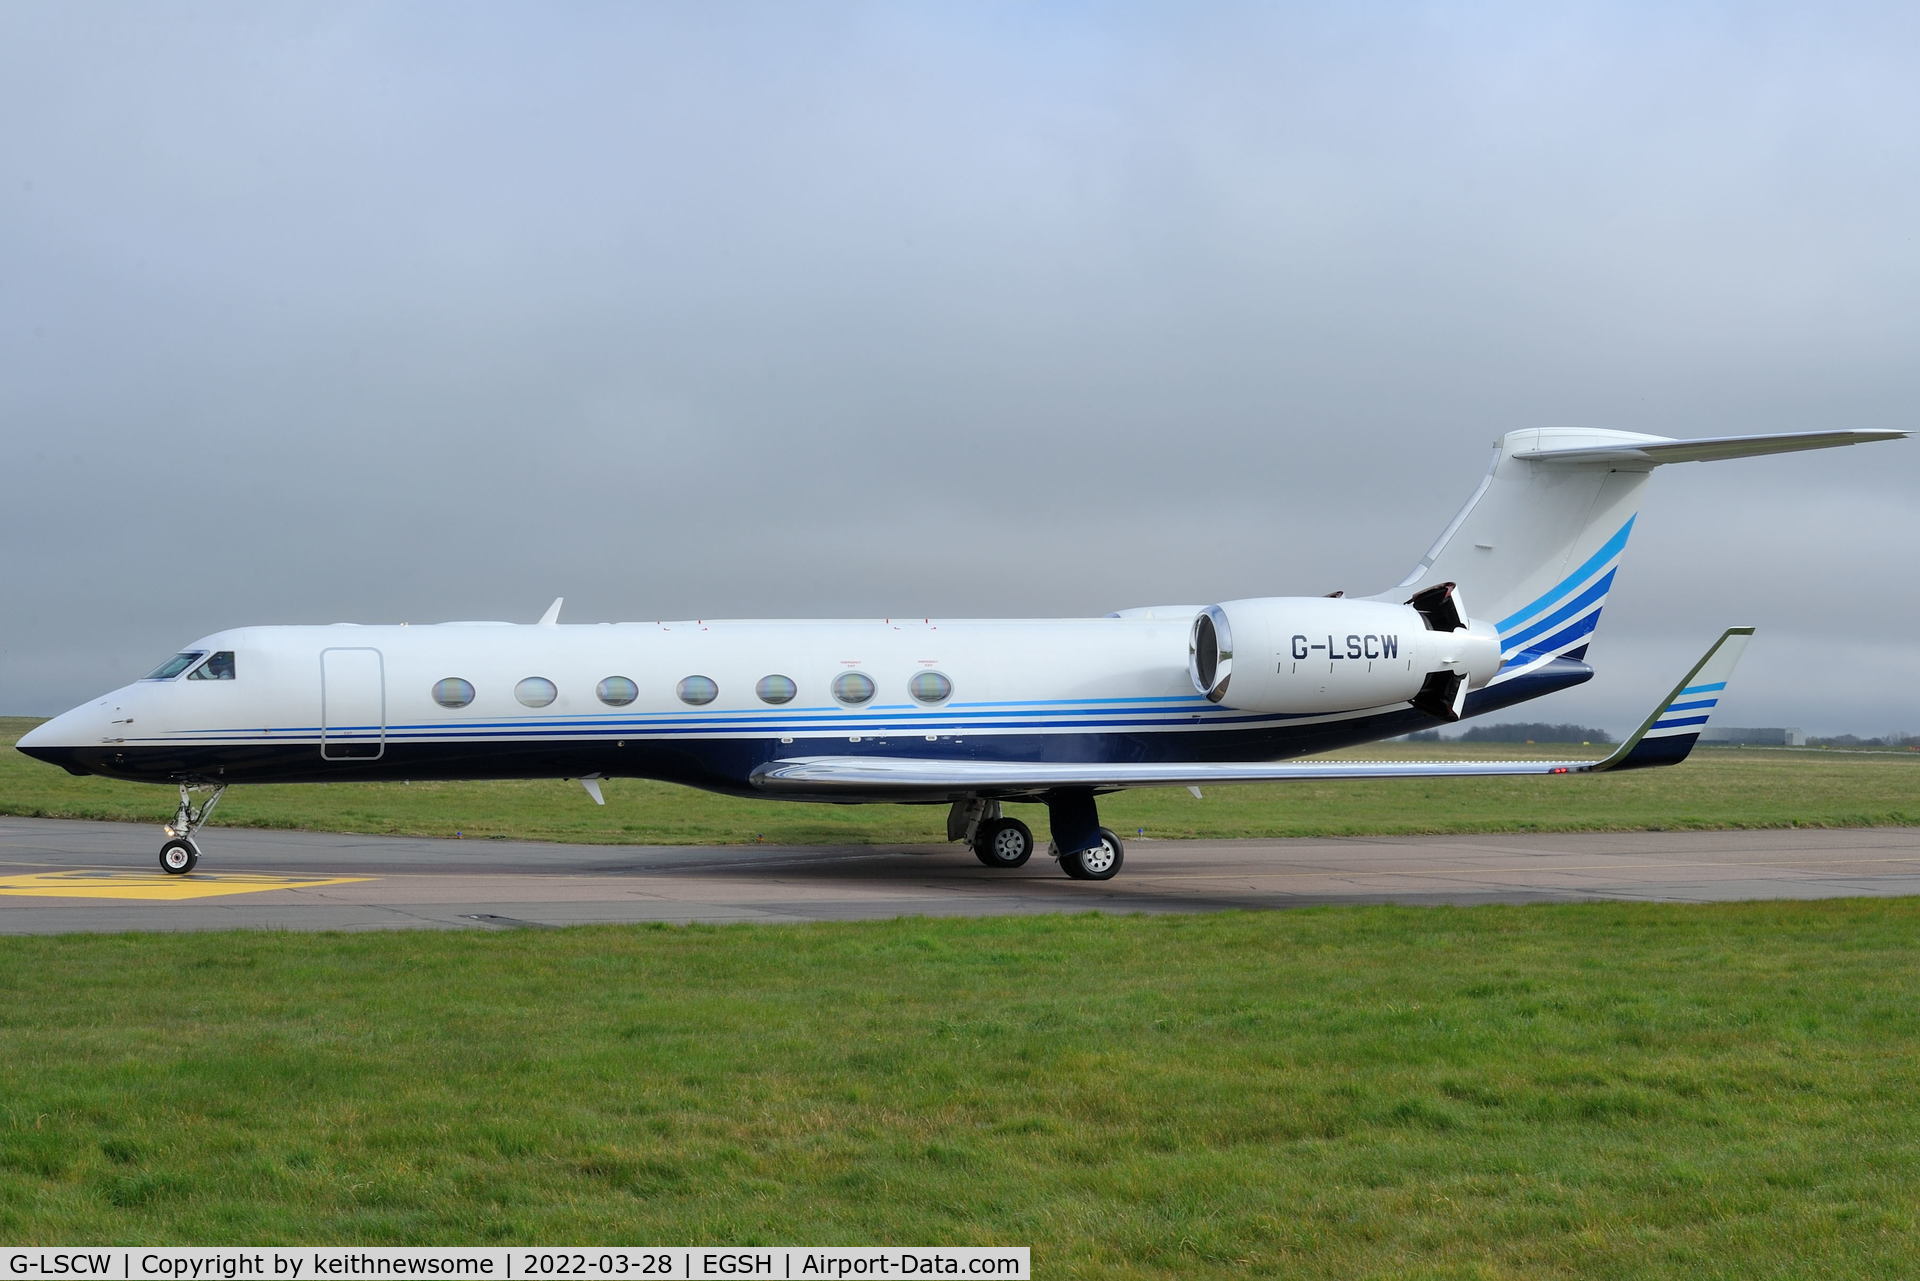 G-LSCW, 2014 Gulfstream Aerospace GV-SP (G550) C/N 5471, Arriving at Norwich from East Midlands Airport.